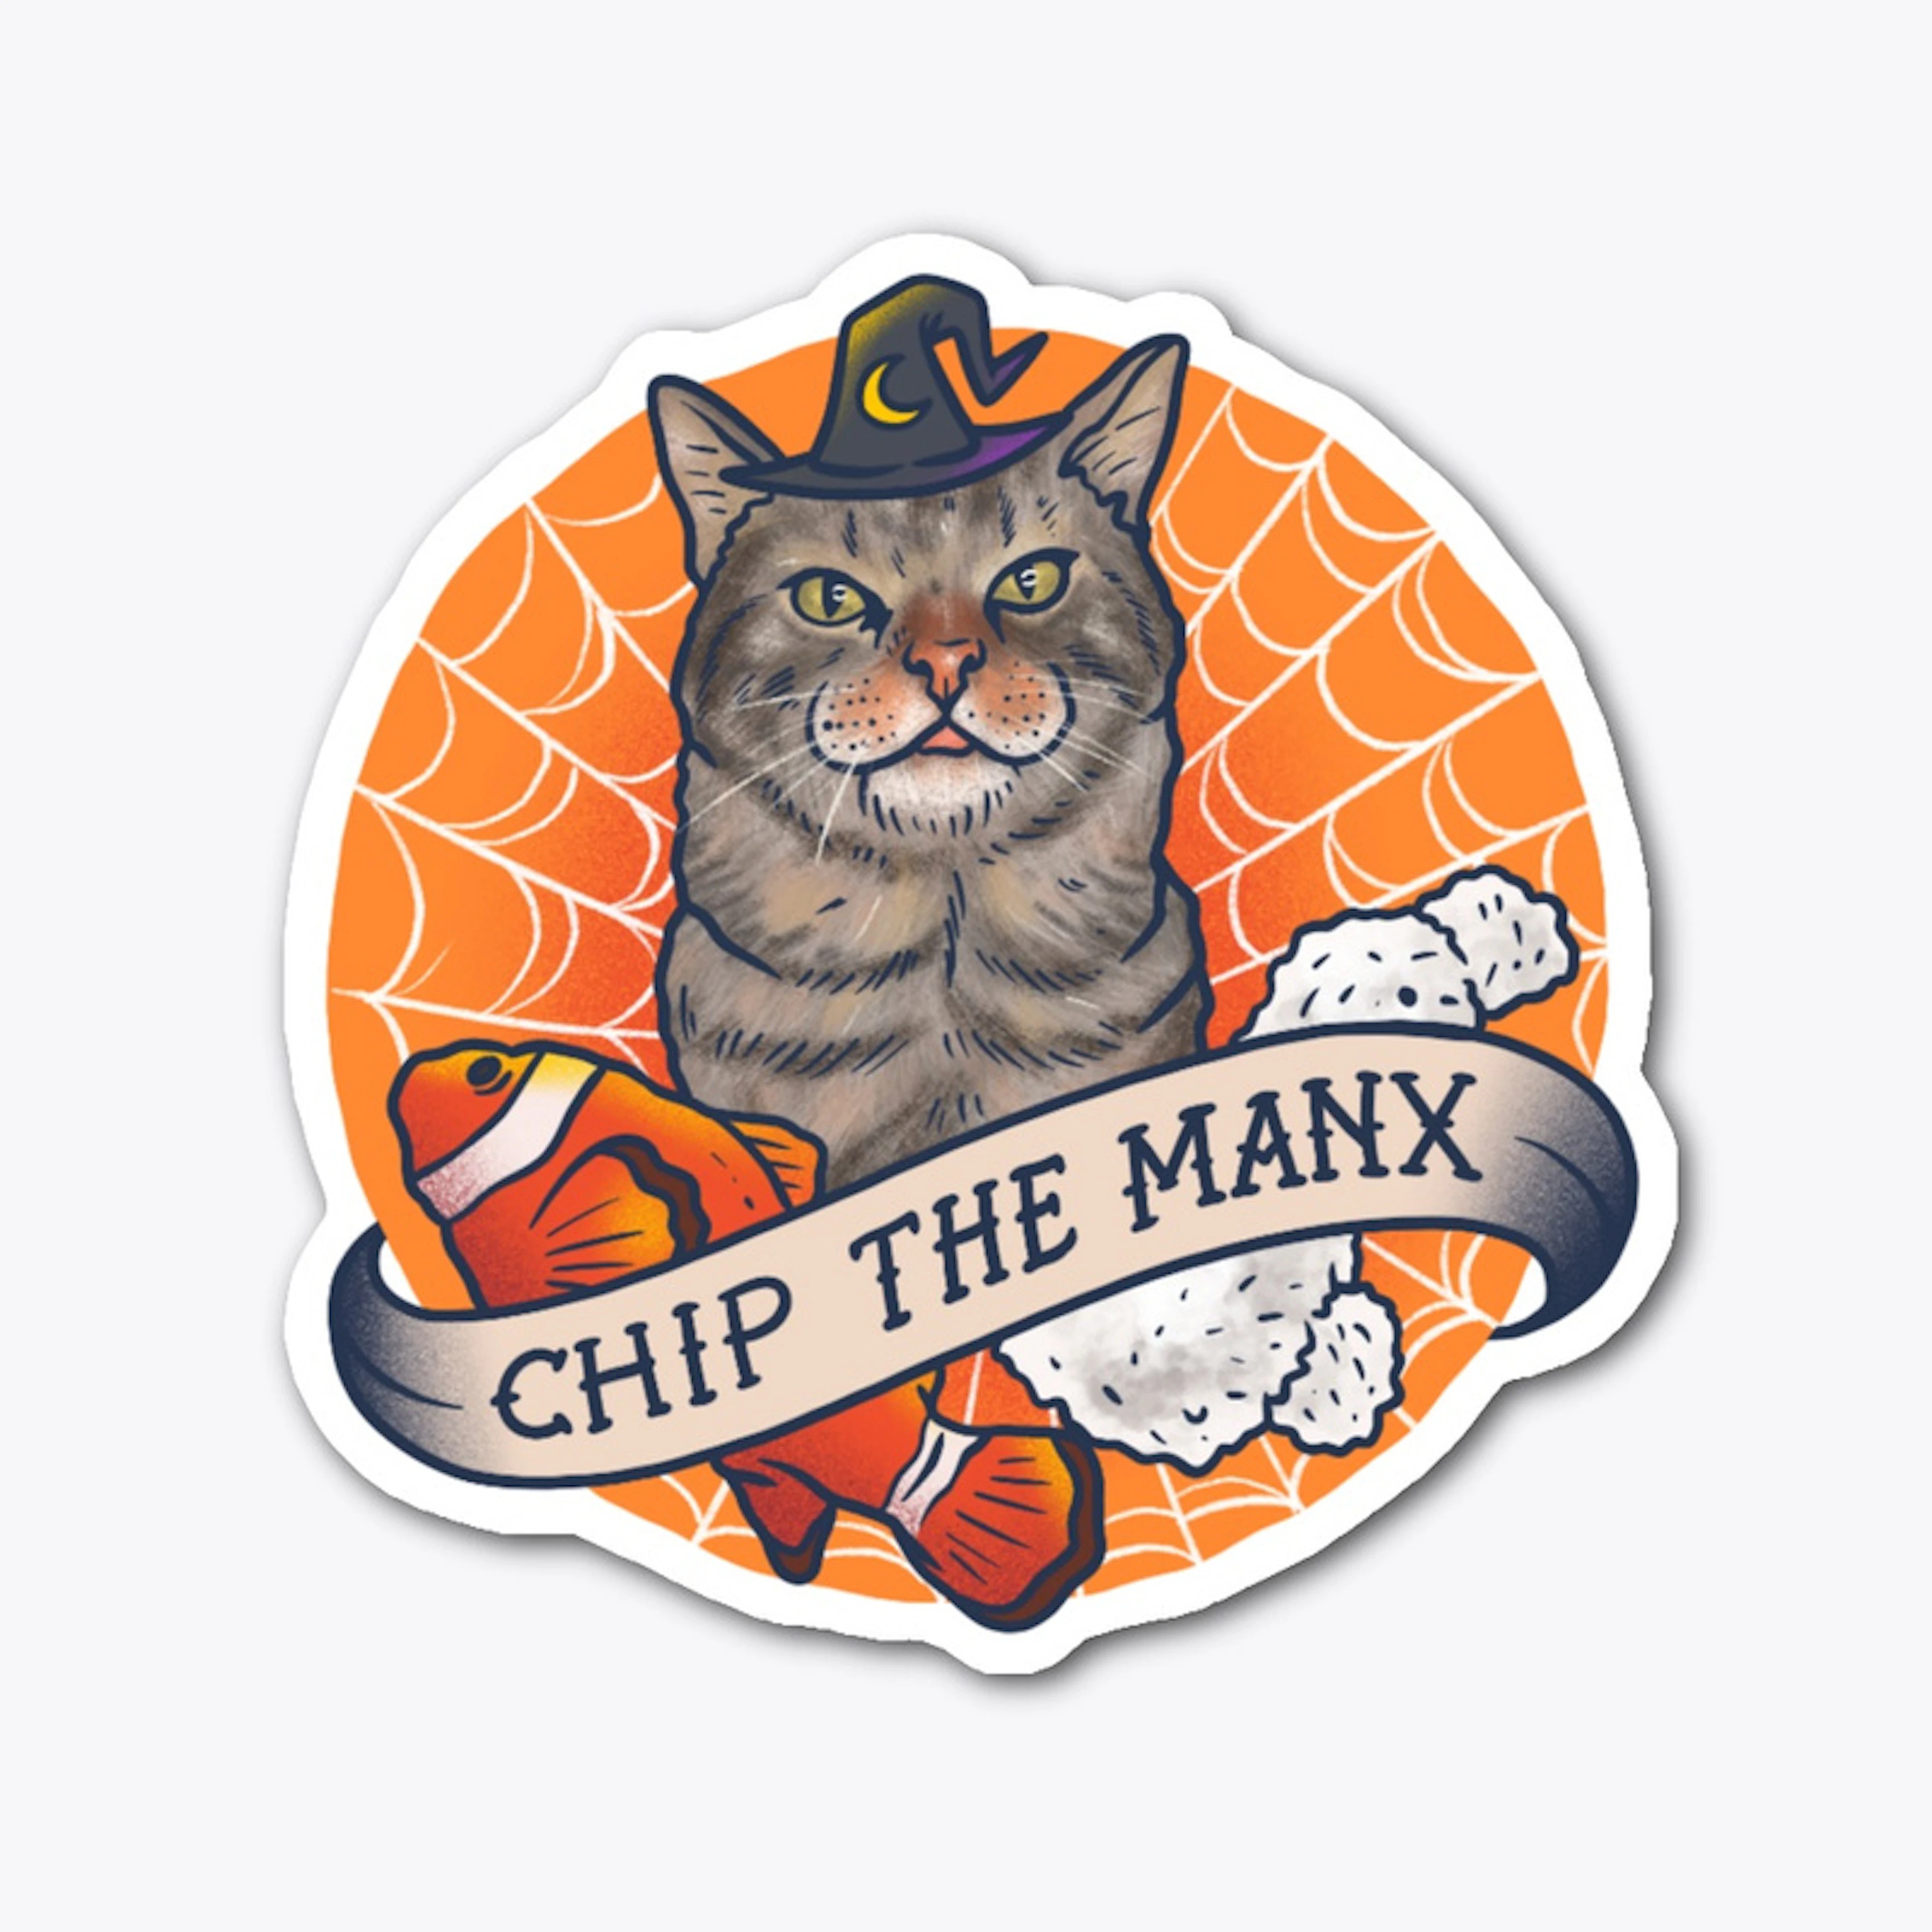 "Eerie-sistible Chip" Sticker